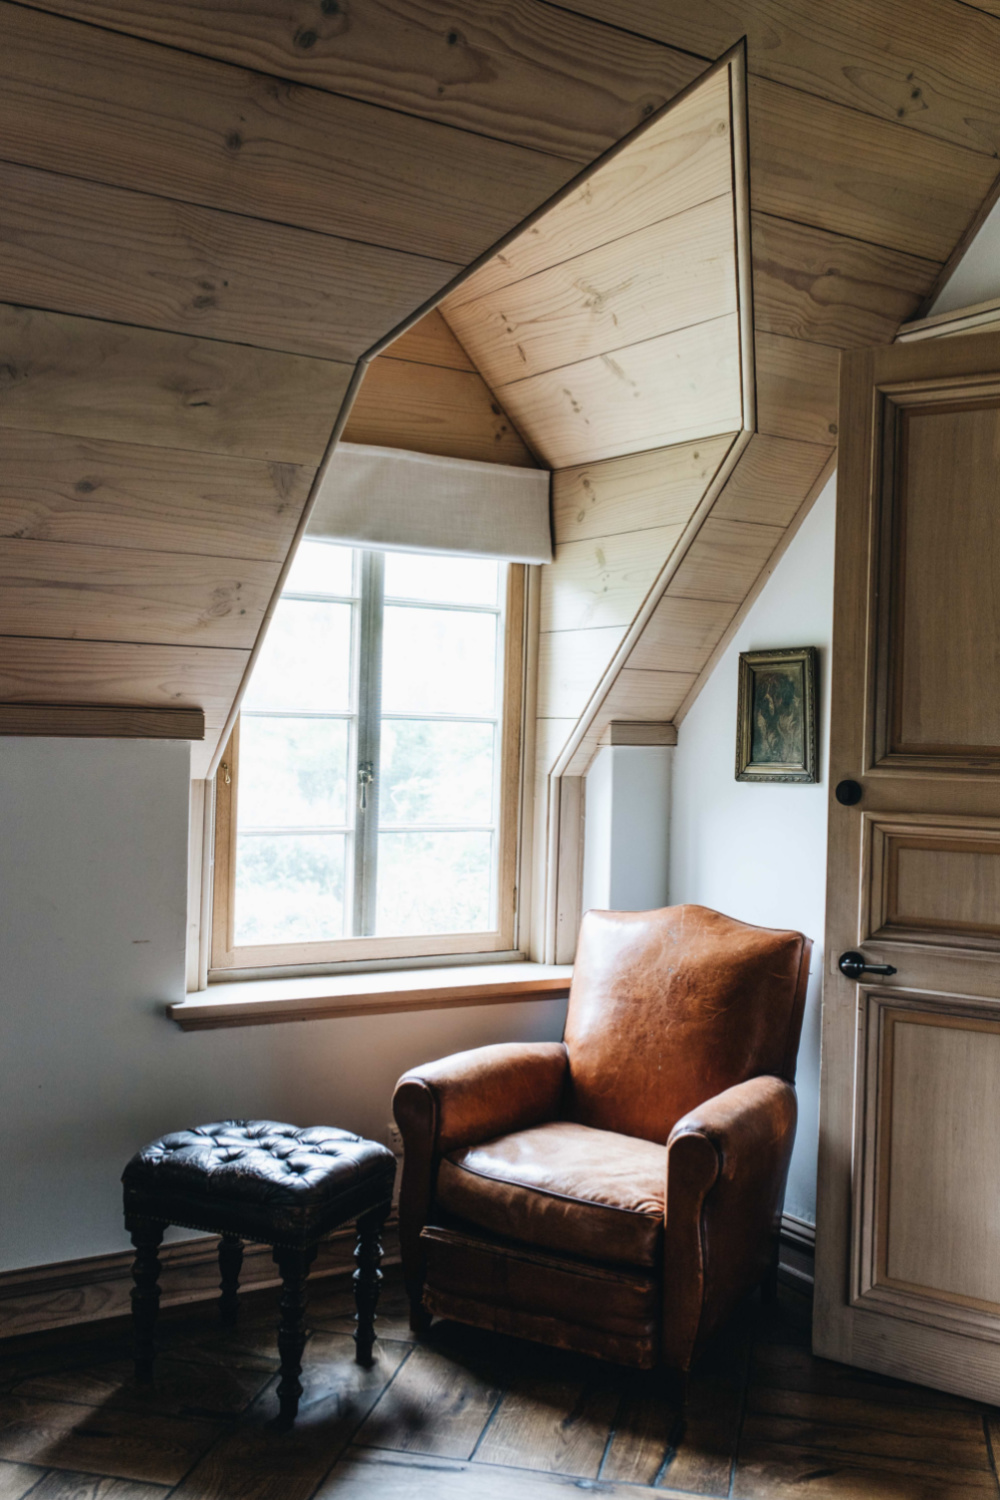 Vintage leather chair near dormer window in a cozy nook of bedroom at Wollumbi. From Melissa Penfold's book LIVING WELL BY DESIGN (Vendome, 2021).